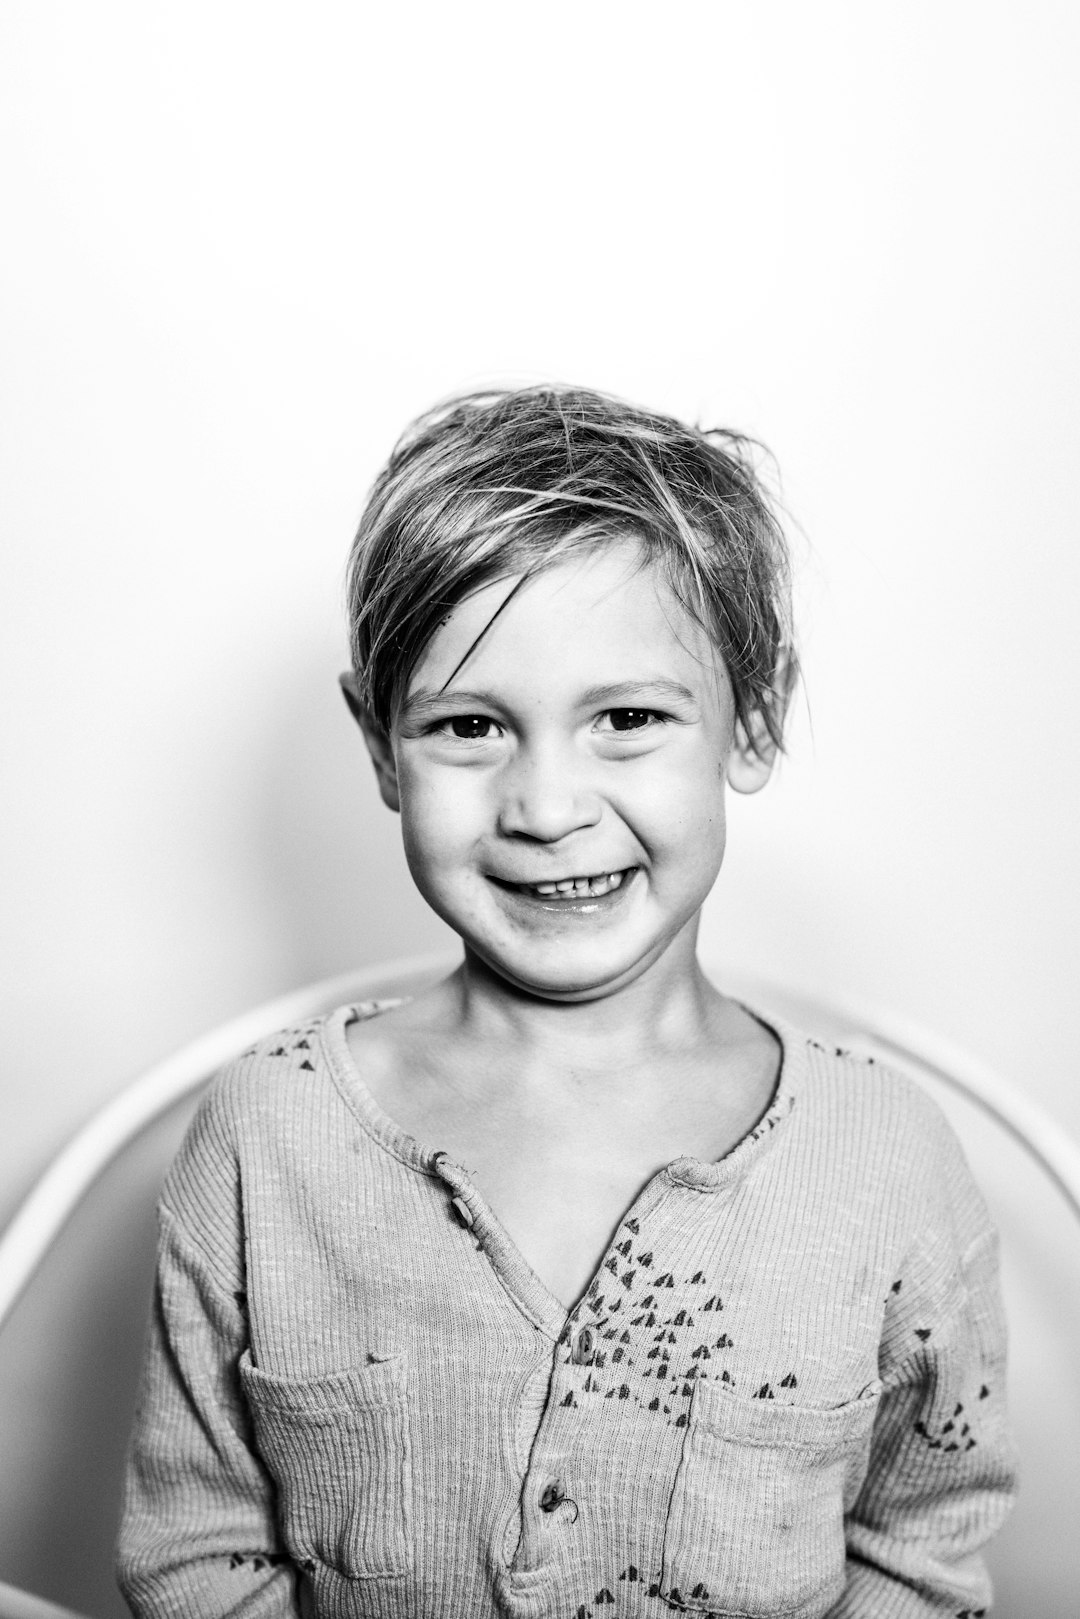 black and white portrait of smiling boy, short hair in the style of [Rineke Dijkstra](https://goo.gl/search?artist%20Rineke%20Dijkstra) photo, studio background, simple with dirty stains –ar 85:128